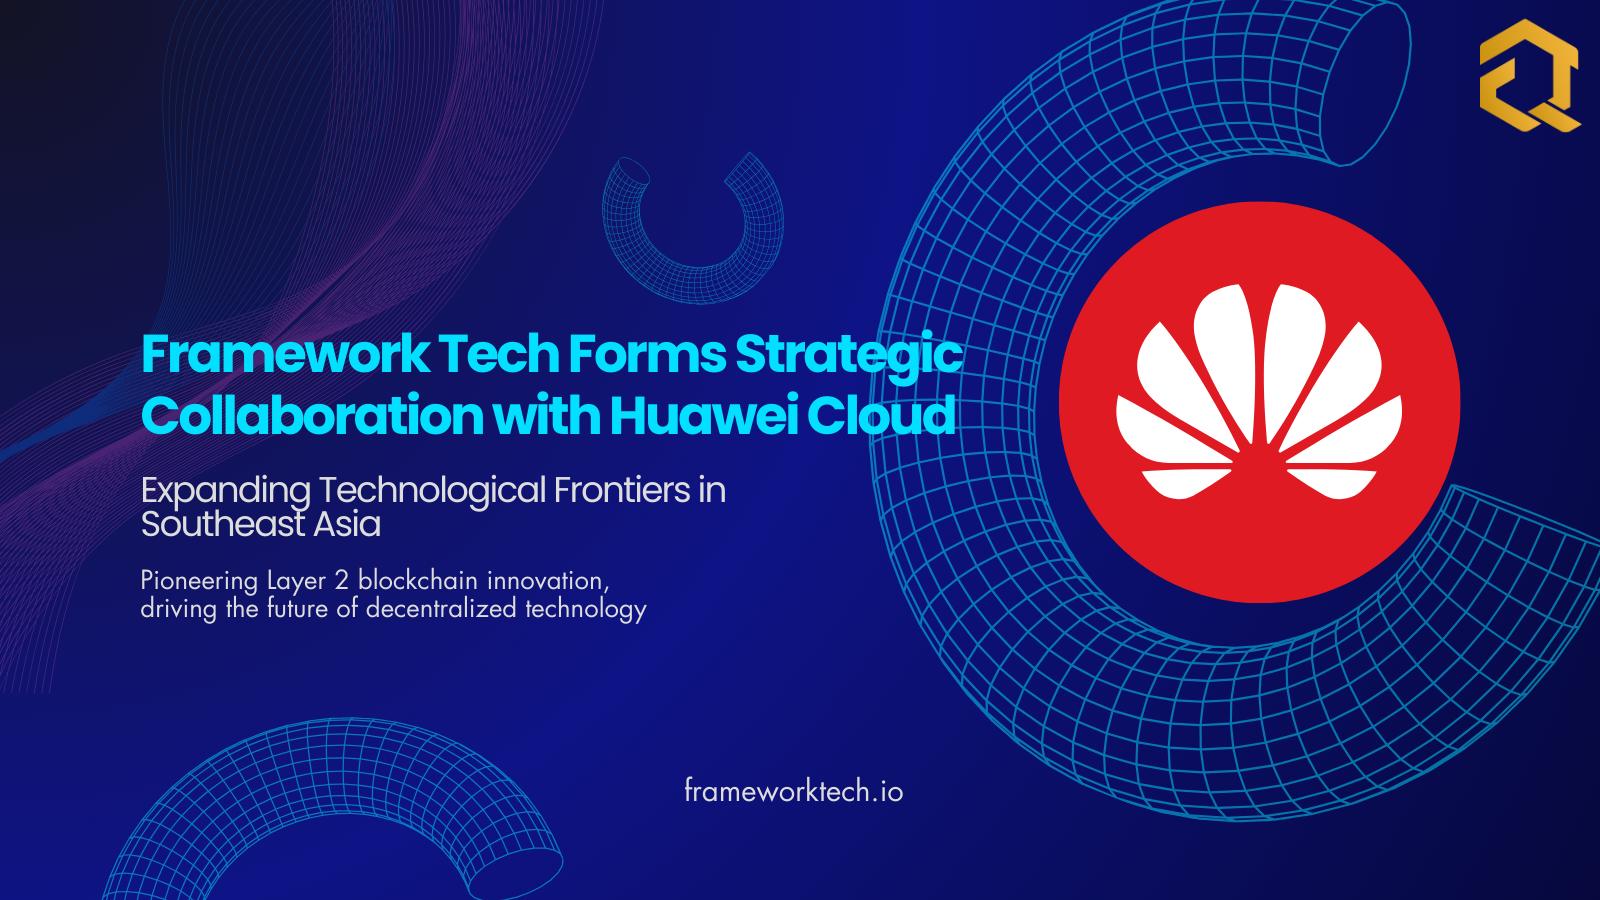 , Framework Tech Forms Strategic Collaboration with Huawei Cloud to Expand Technological Frontiers in Southeast Asia